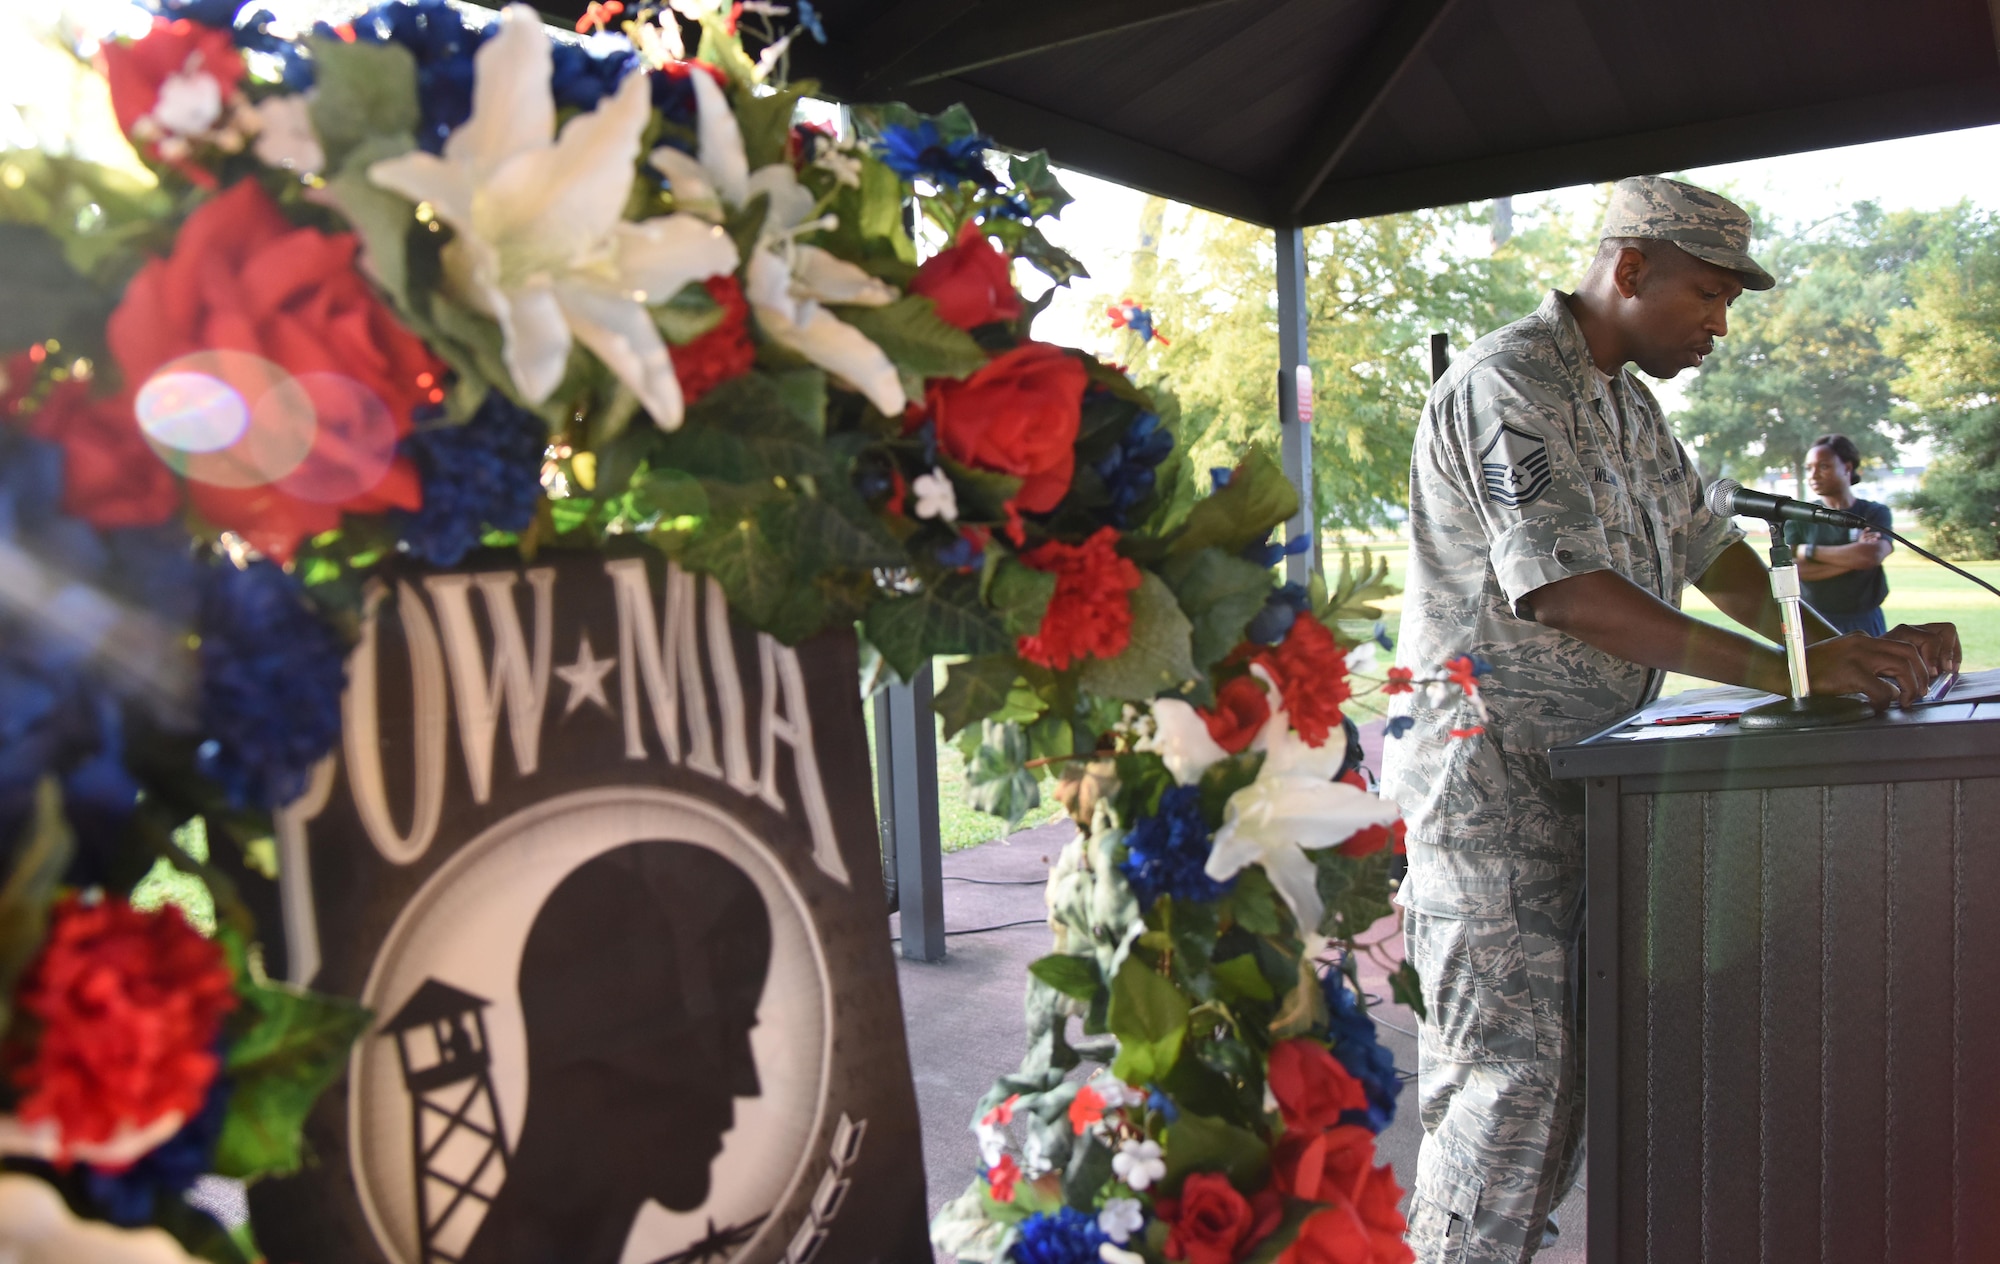 Master Sgt. Clarence Williams, 81st Surgical Operations Squadron operating room flight chief, reads the names of those who were prisoners of war or are missing in action during Keesler’s POW/MIA 24-hour memorial run and vigil at the Crotwell Track Sept. 14, 2017, on Keesler Air Force Base, Mississippi. The event was held to raise awareness and pay tribute to all prisoners of war and those military members still missing in action. (U.S. Air Force photo by Kemberly Groue)